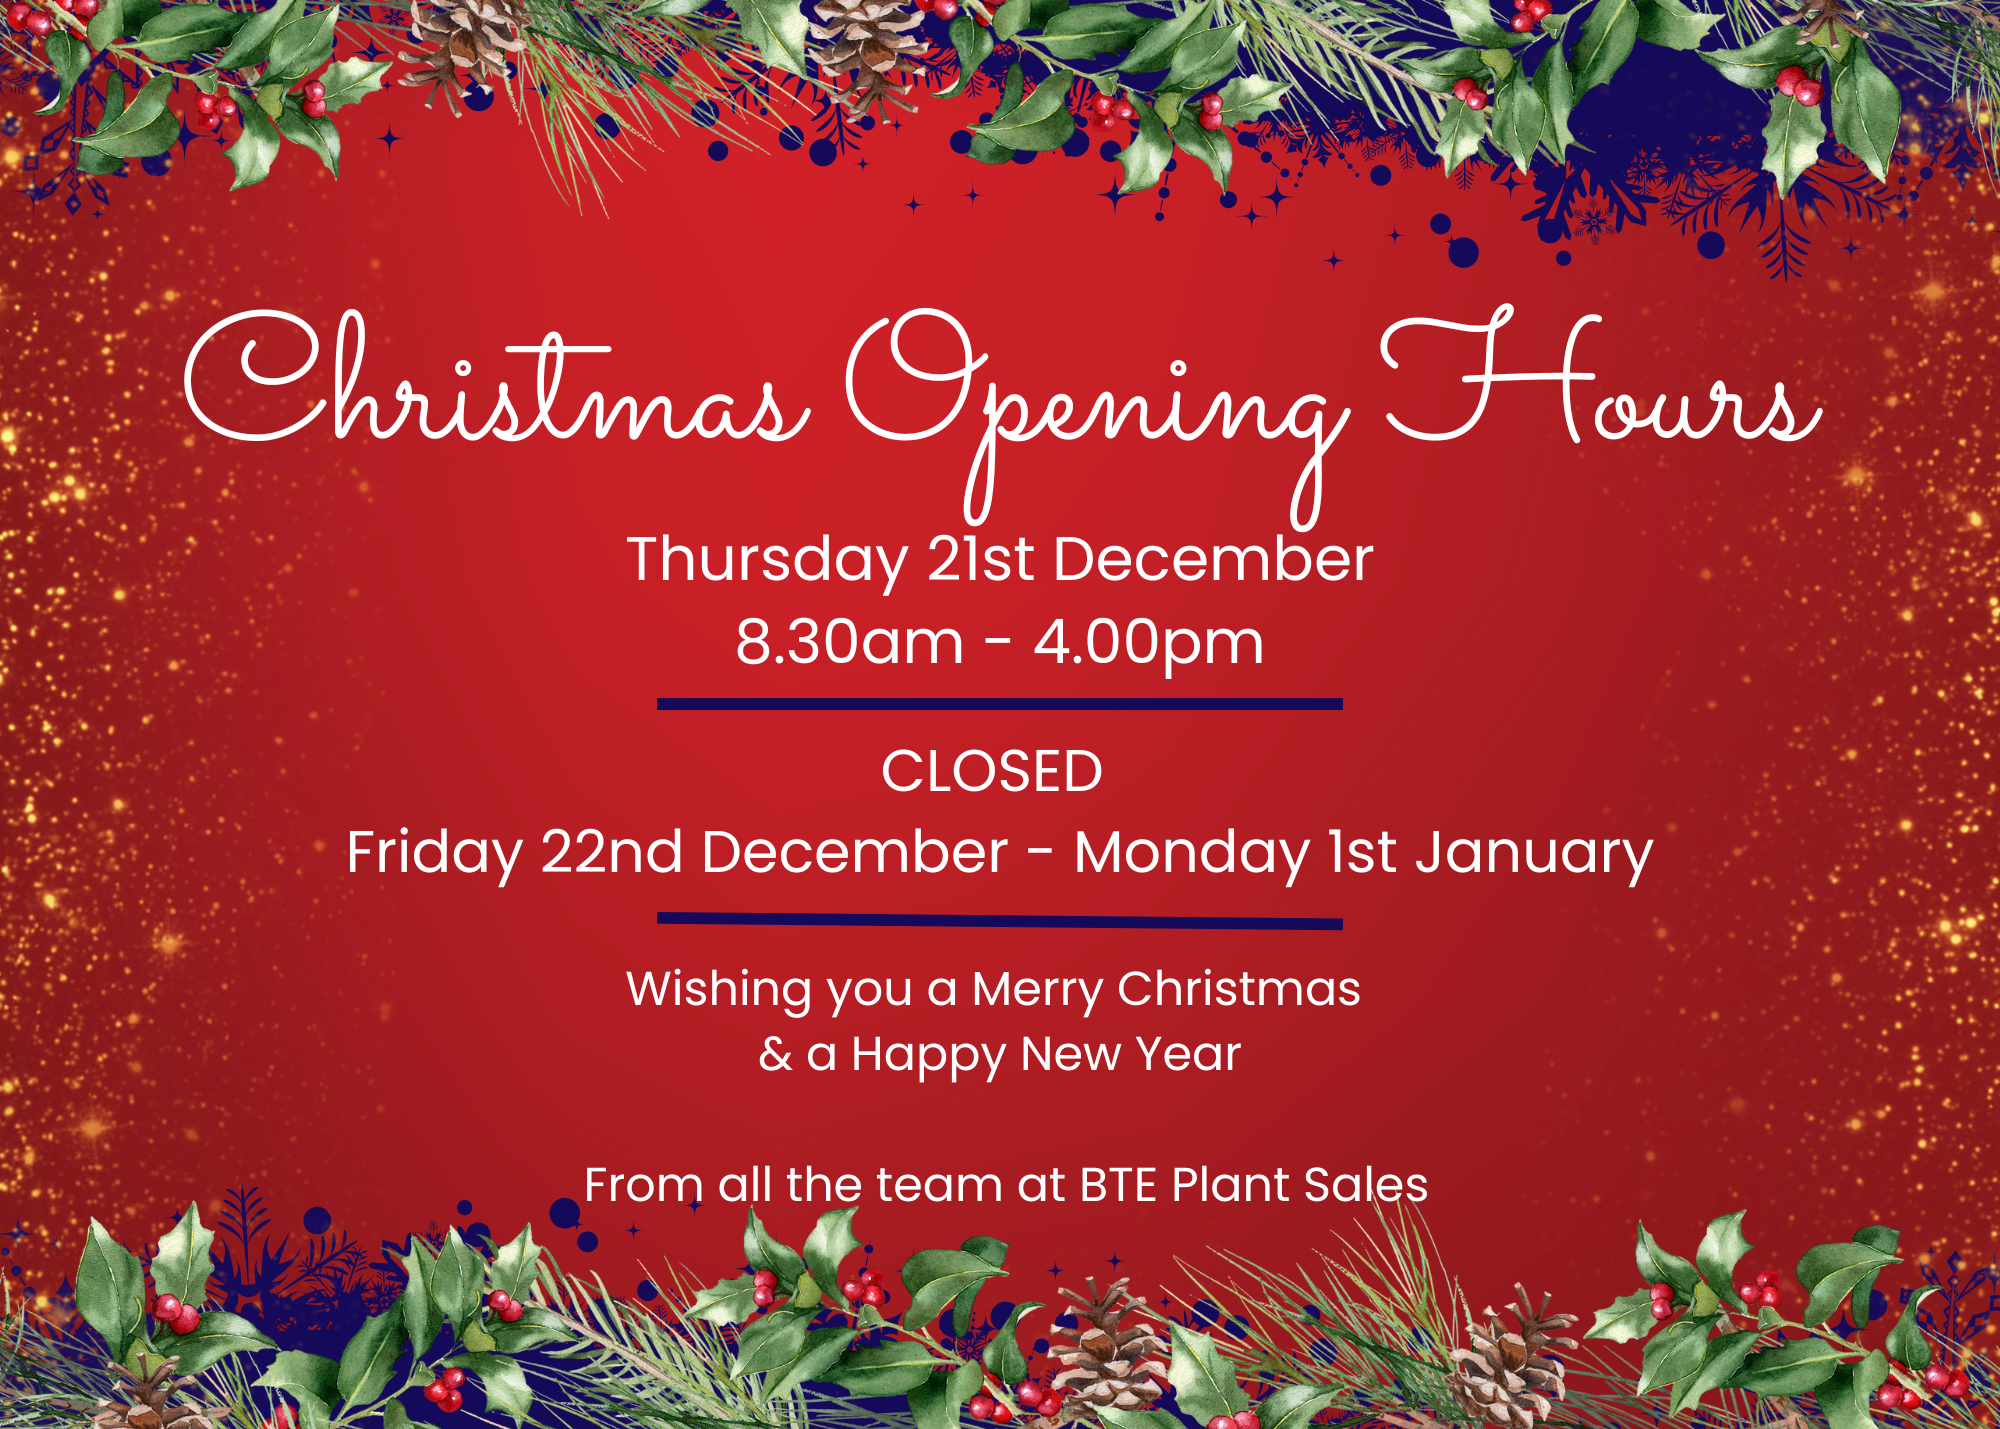 BTE's Christmas opening hours. Friday 23rd December 8.30am - 16.00pm. closed Saturday 24th December - Monday 2nd January. Back Open Tuesday 3rd January at 8.30am